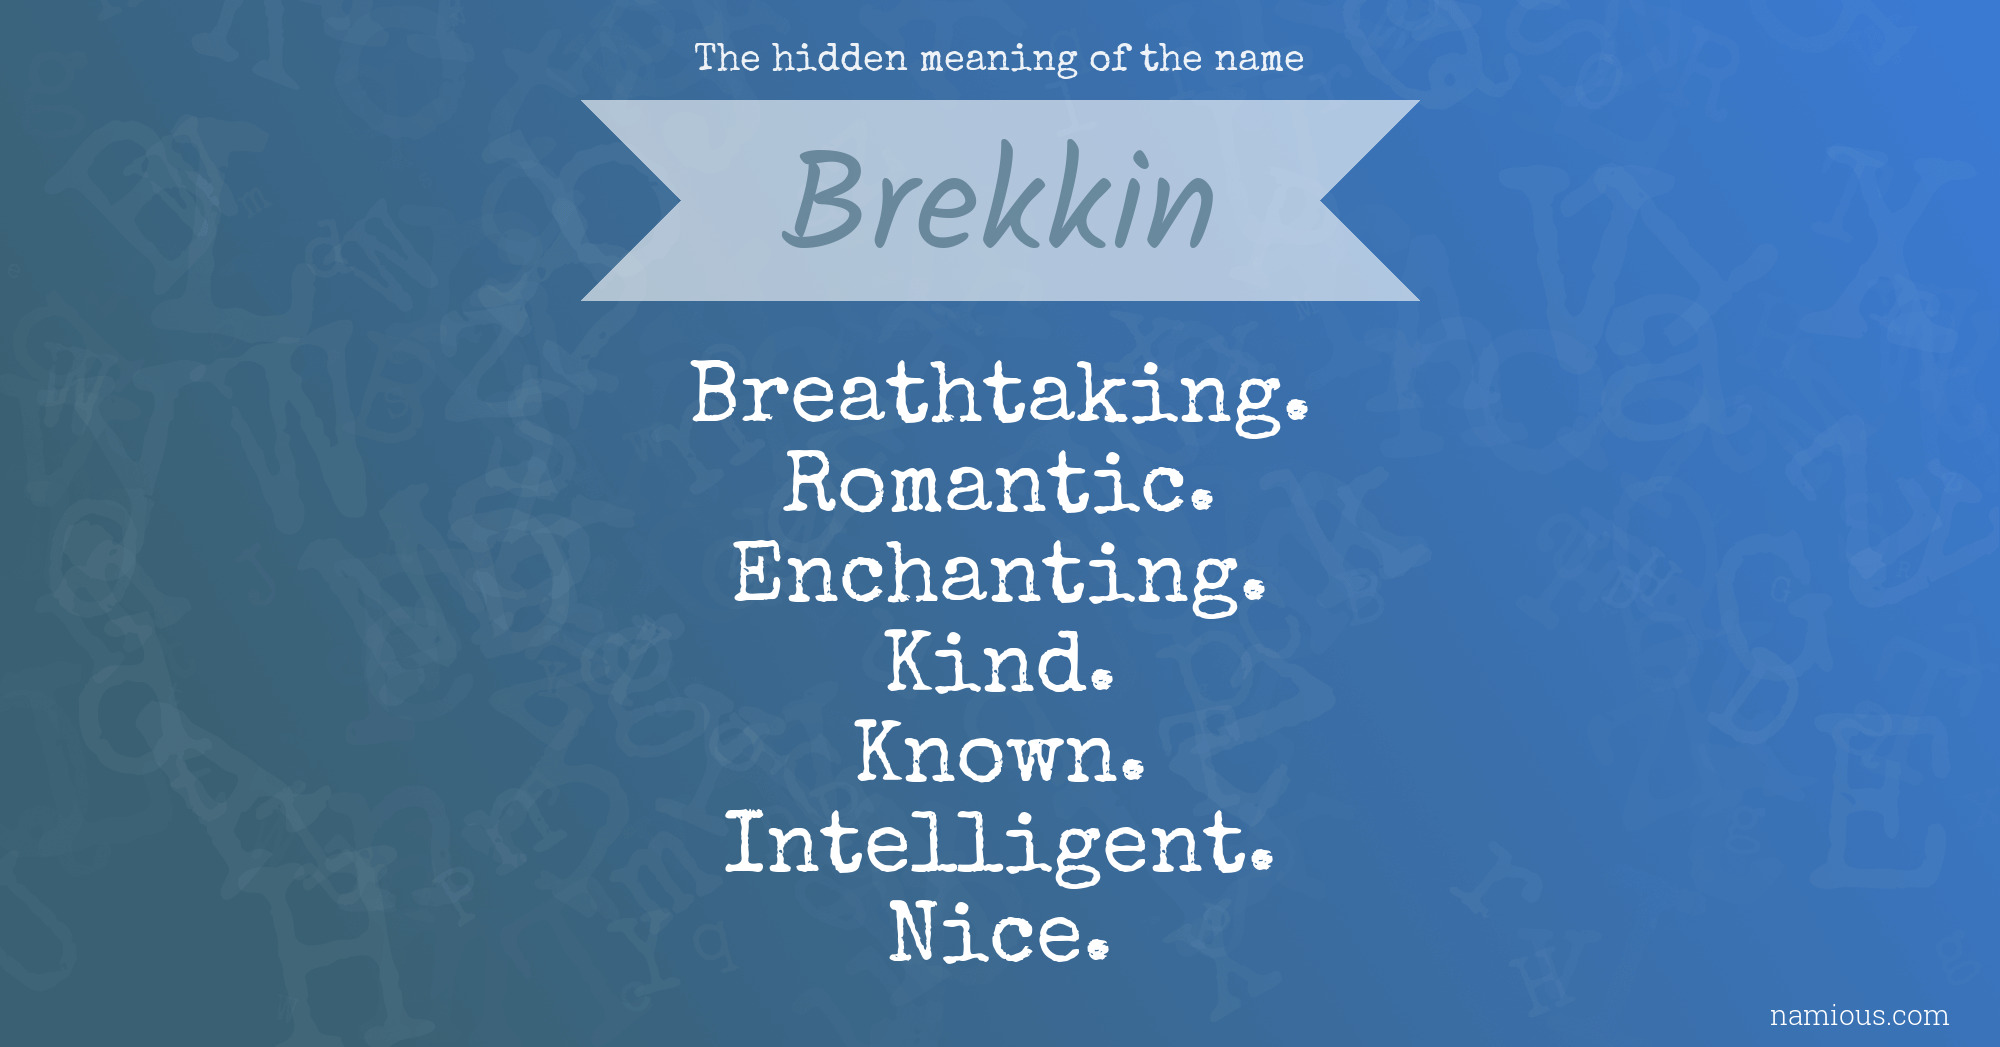 The hidden meaning of the name Brekkin